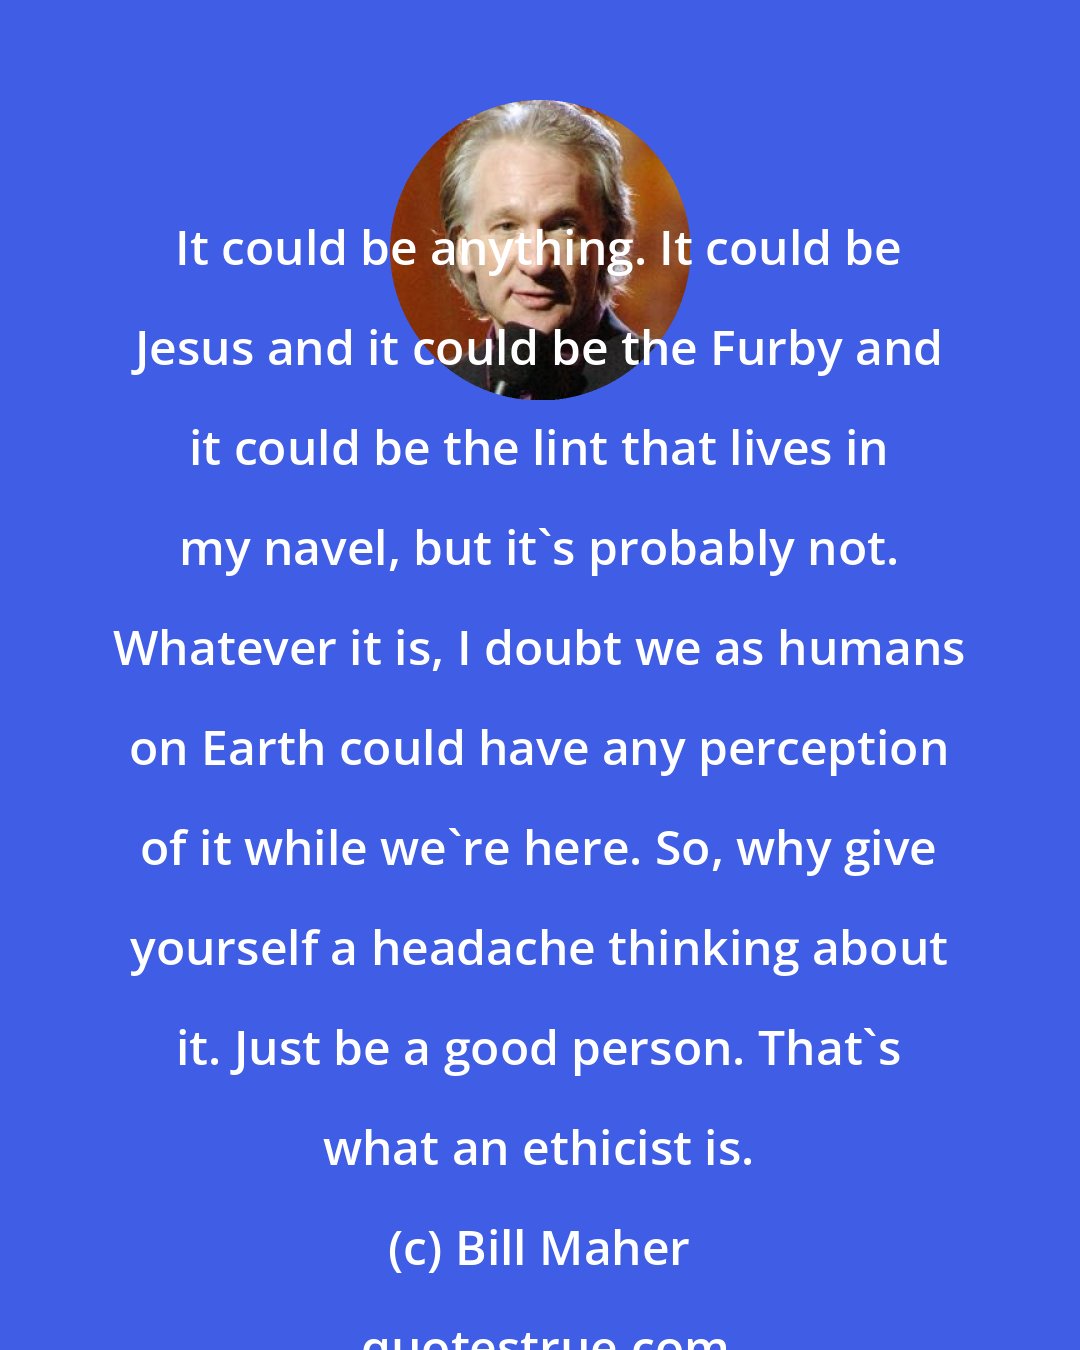 Bill Maher: It could be anything. It could be Jesus and it could be the Furby and it could be the lint that lives in my navel, but it's probably not. Whatever it is, I doubt we as humans on Earth could have any perception of it while we're here. So, why give yourself a headache thinking about it. Just be a good person. That's what an ethicist is.